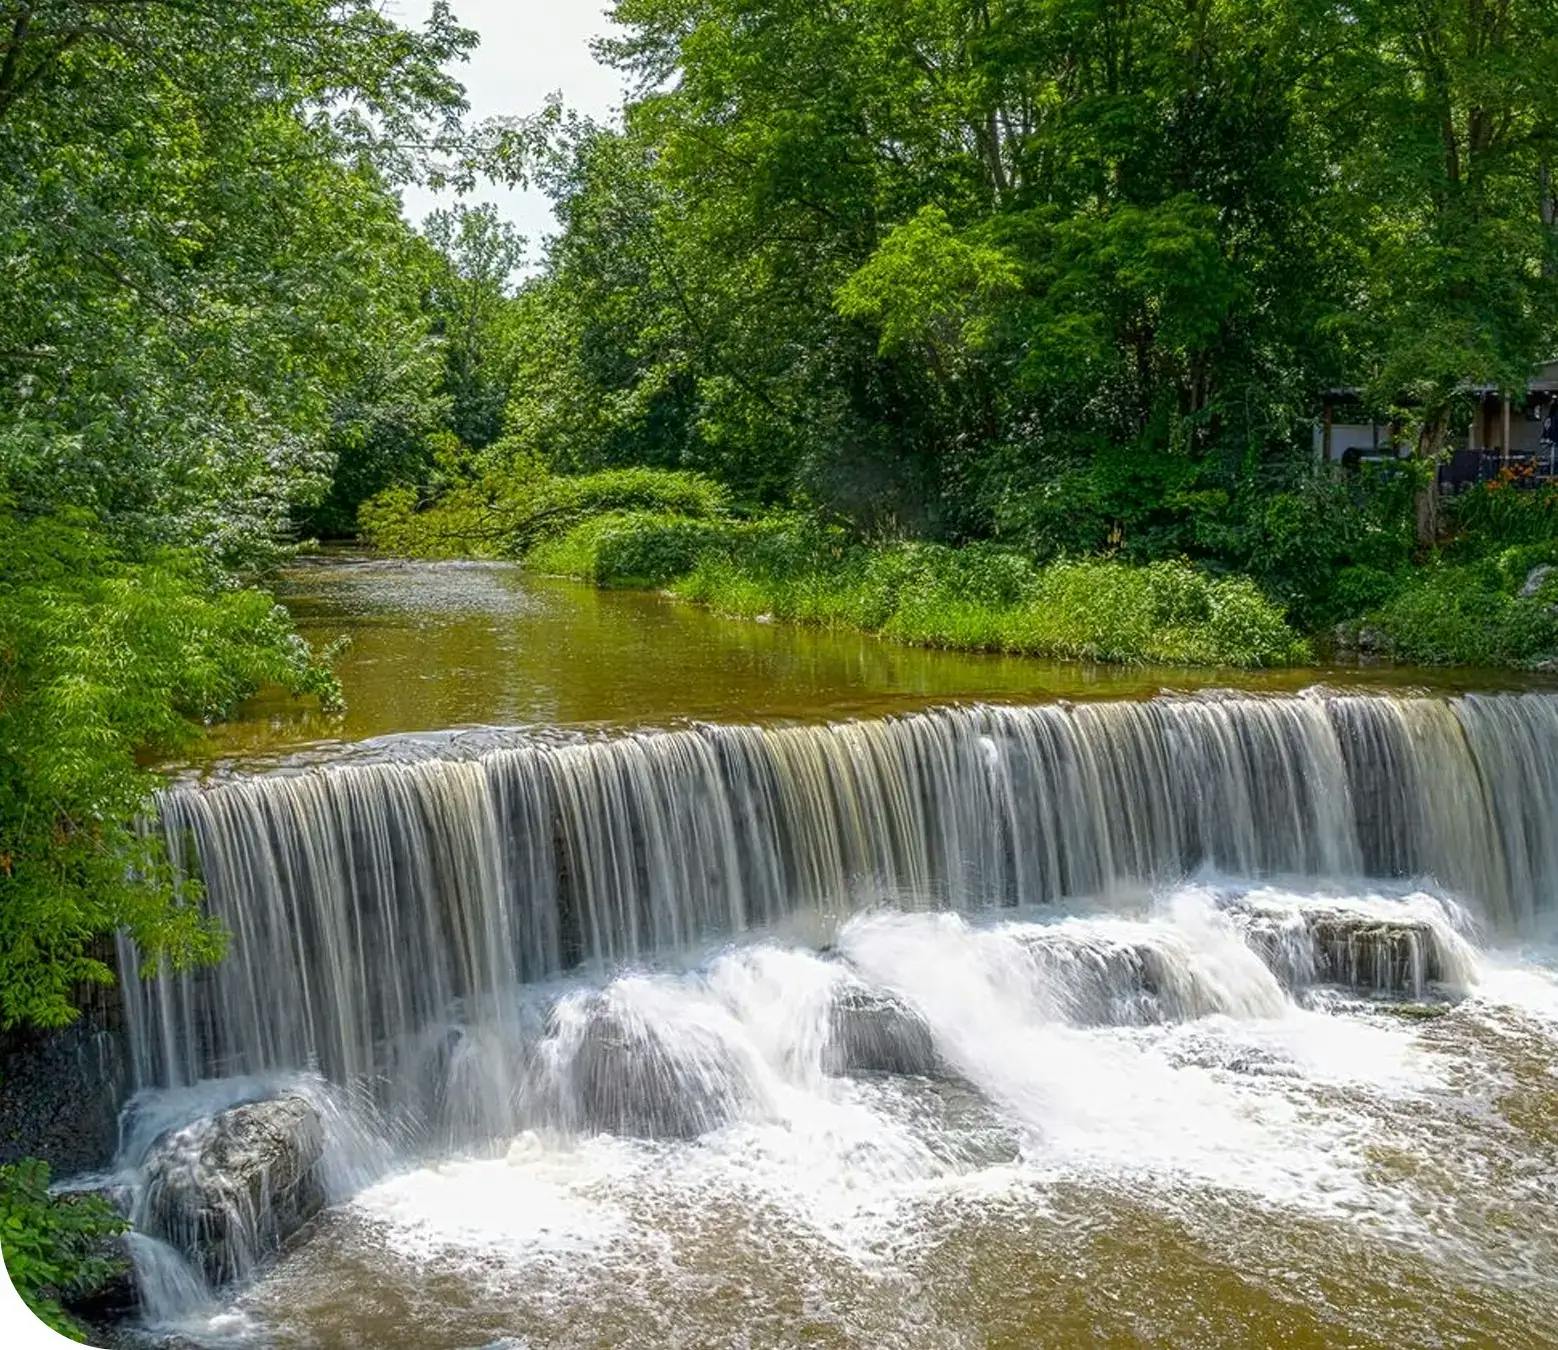 A picture of Flint Creek falls in the village of Phelps, NY